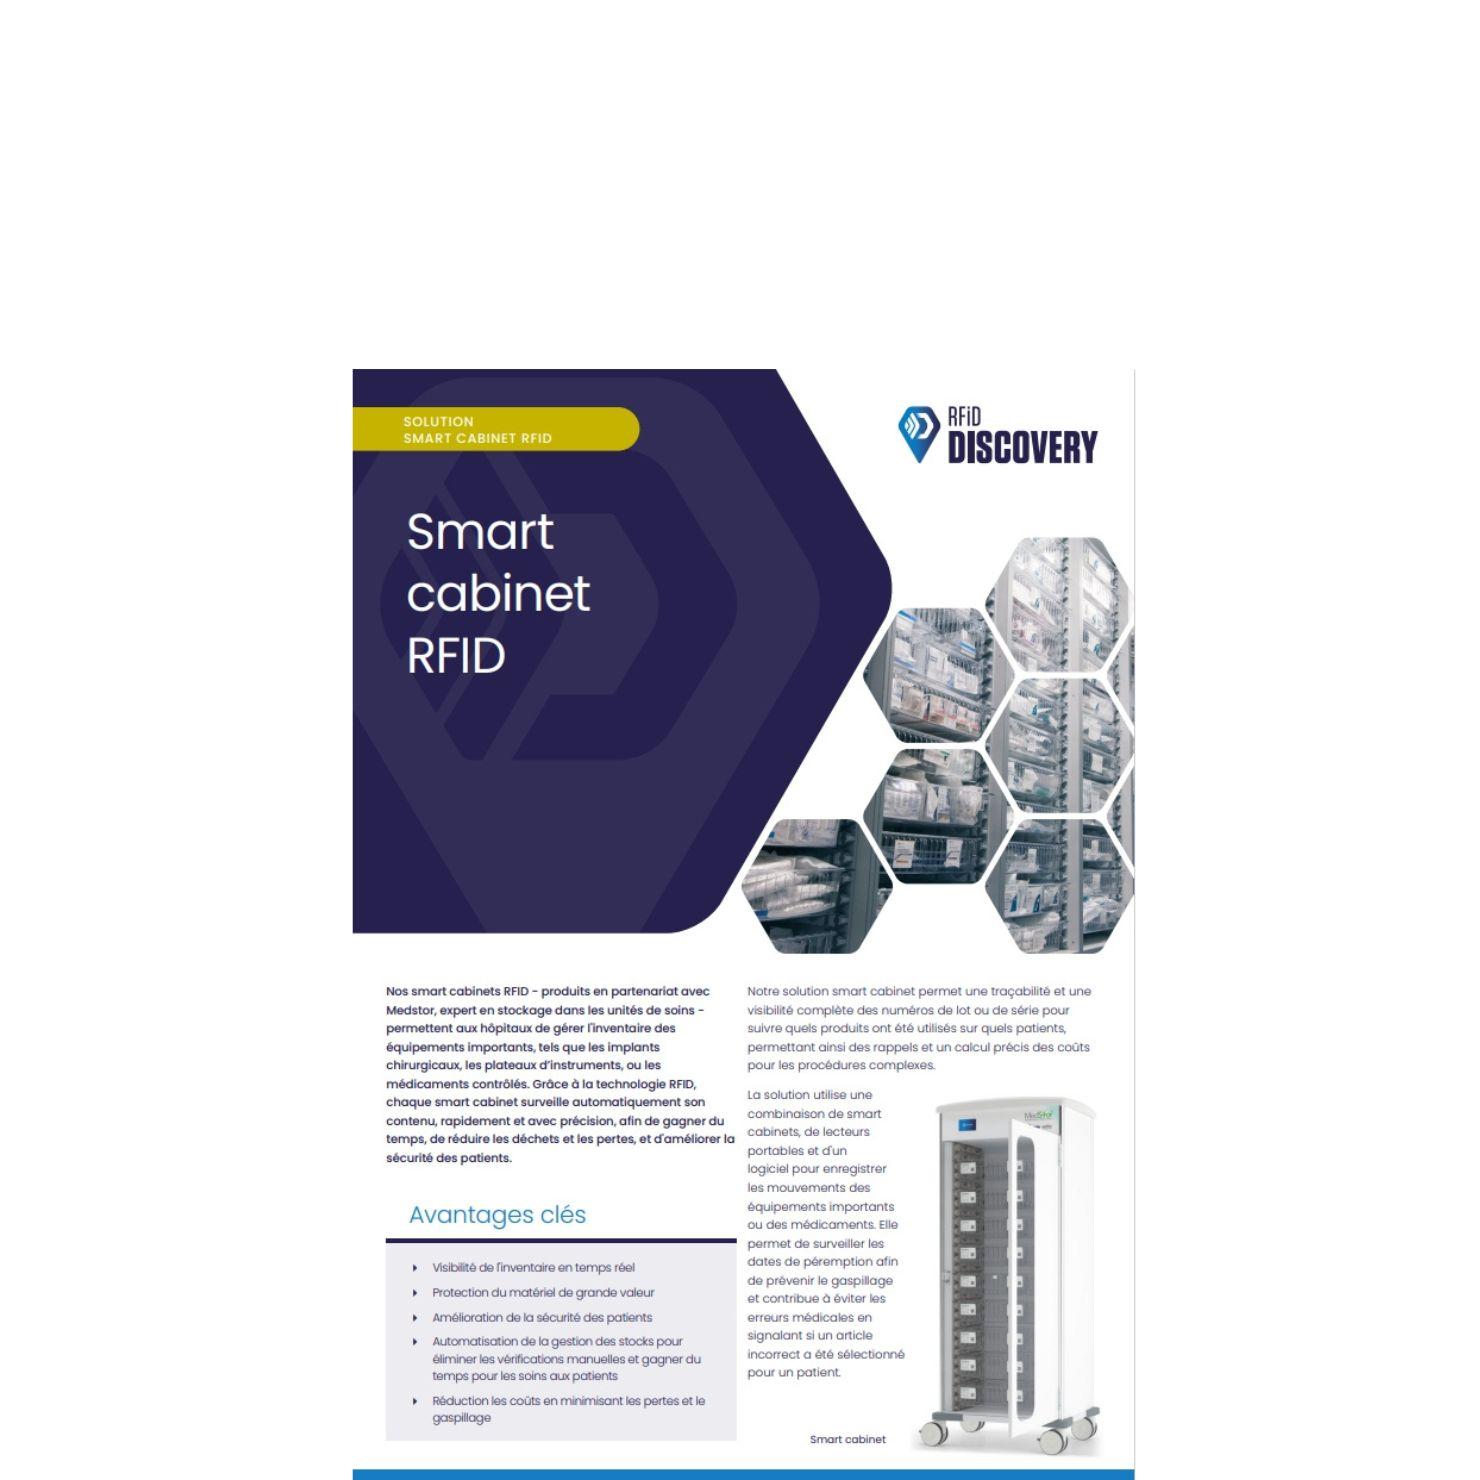 smart cabinet rfid french brochure